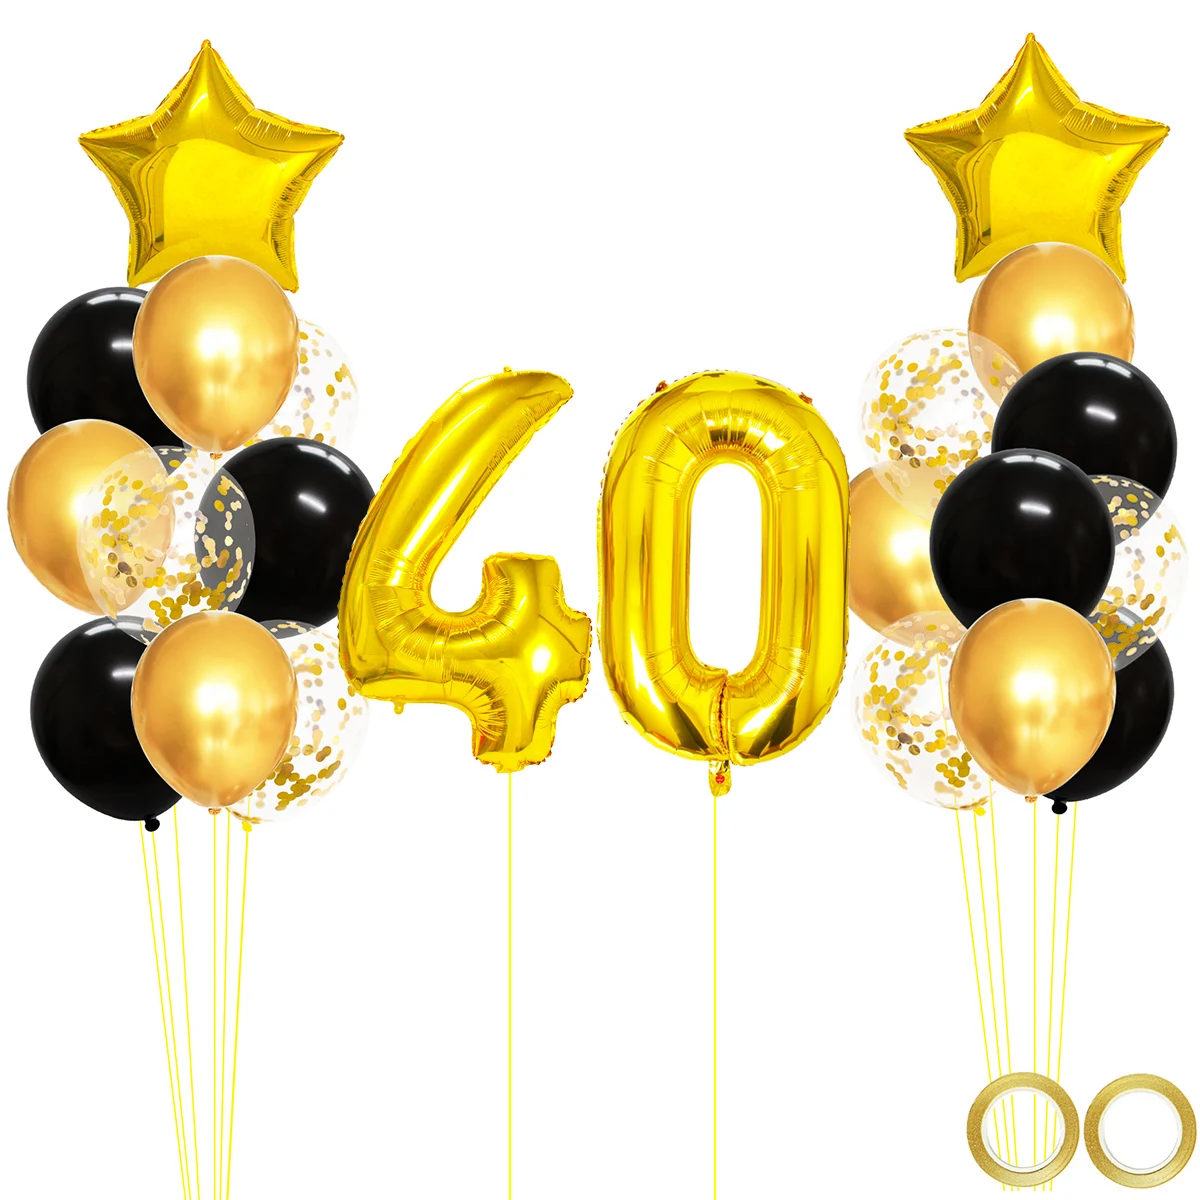 

24pcs Gold Number 40 Foil Balloon Gold Black Mixed Balloons 40th Birthday Party Decorations 40 Years Old Man Woman Supplies